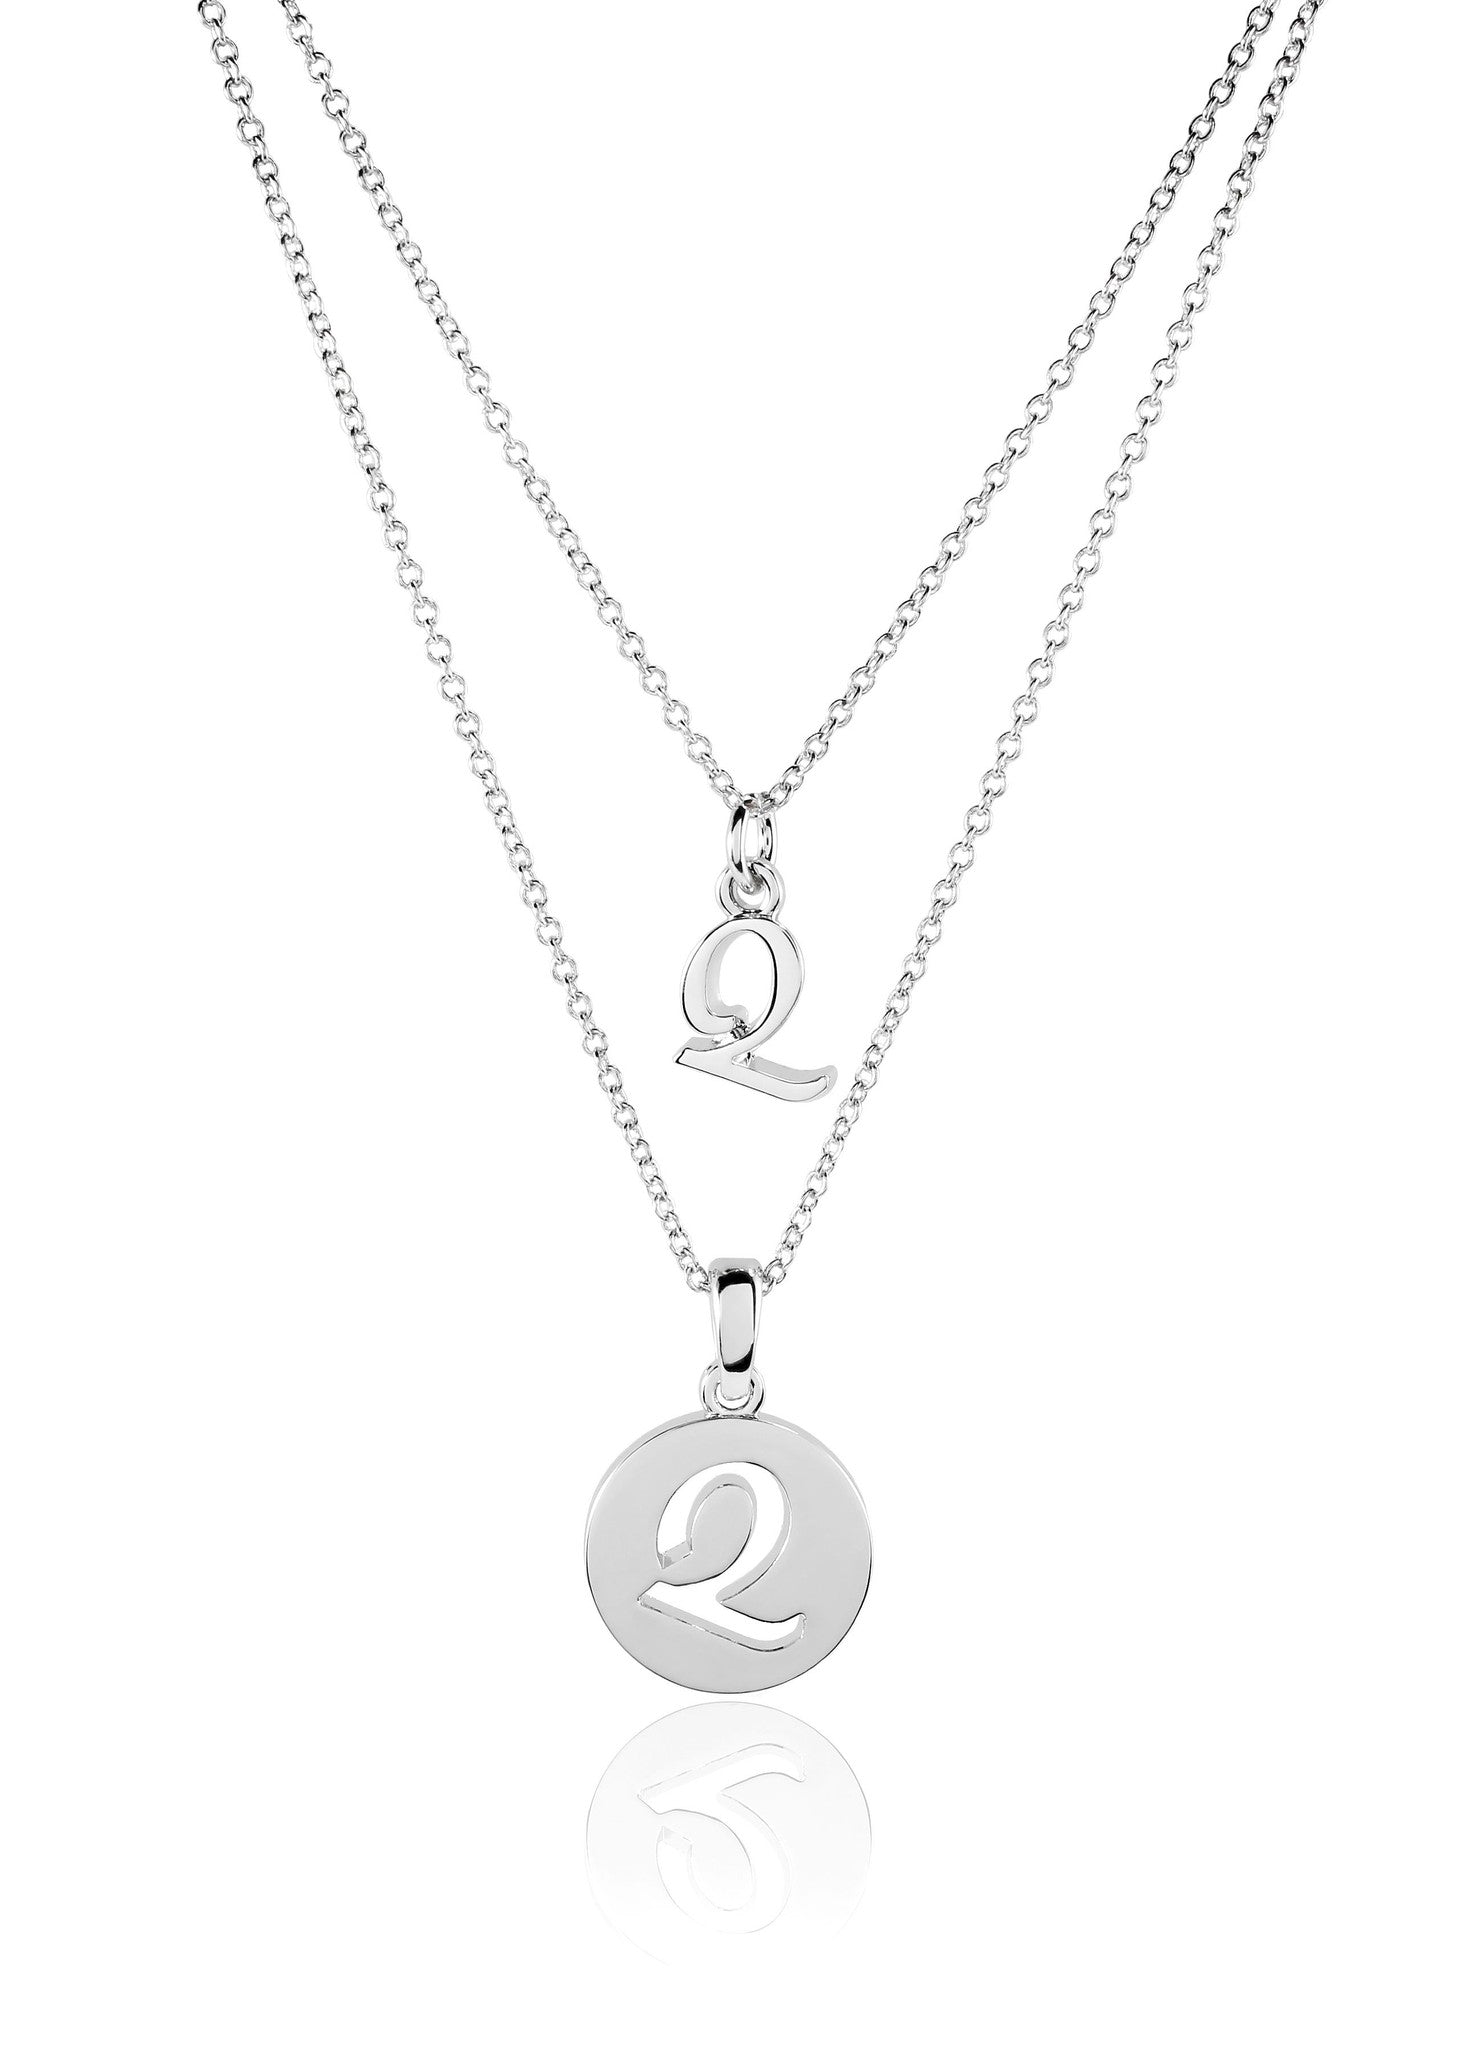 Dainty Double Initial Necklace with Adjustable Chain and Extender by BG247®